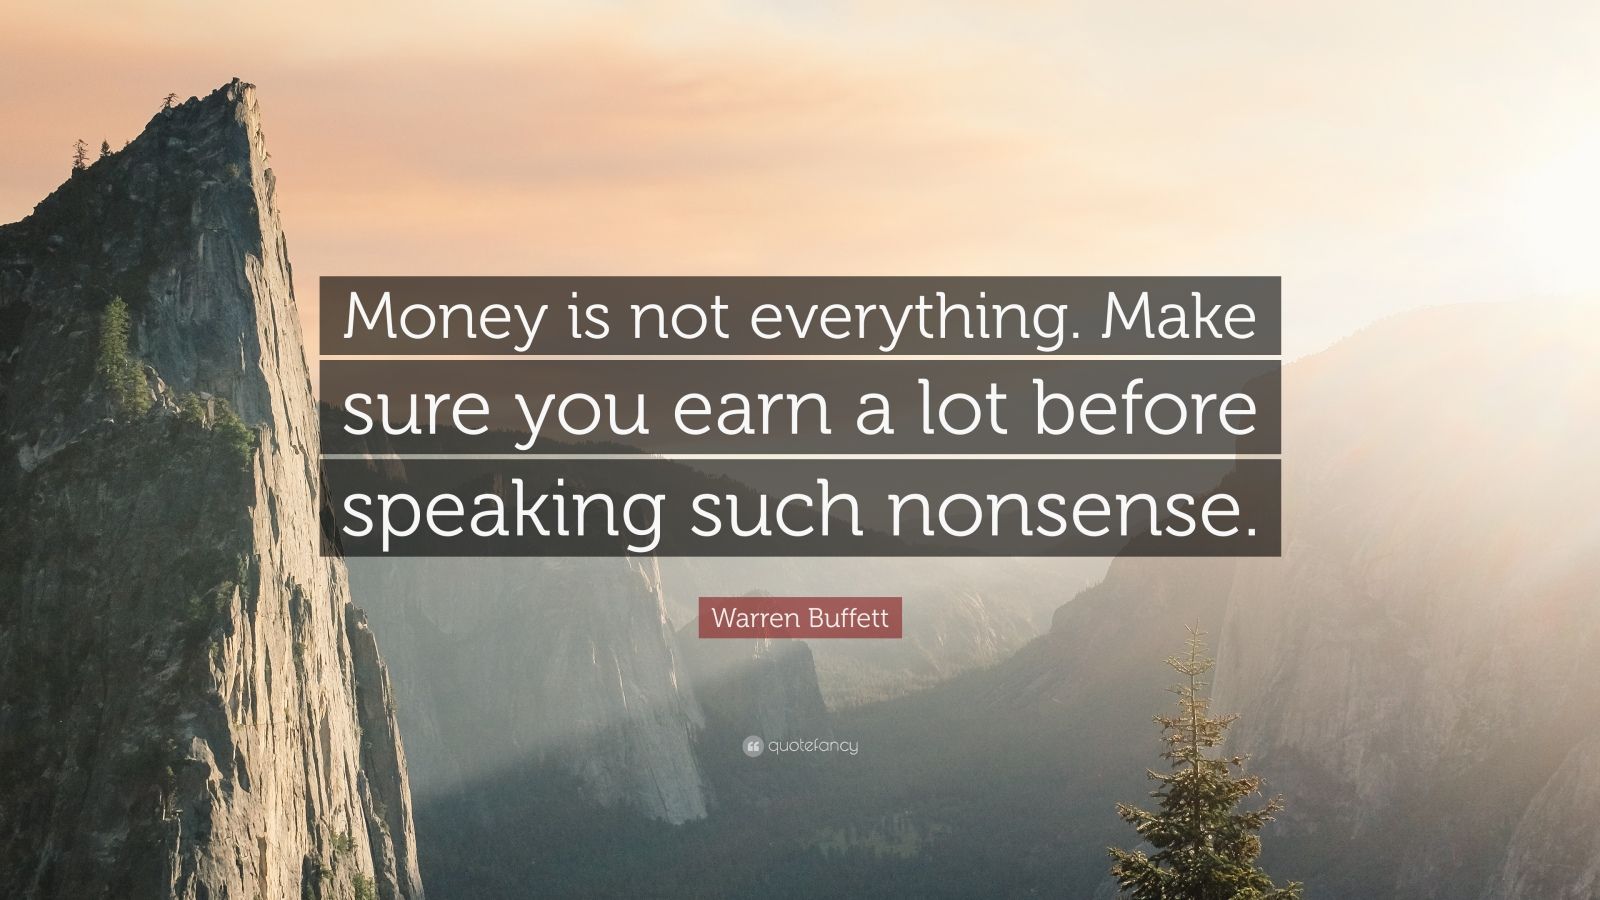 Warren Buffett Quote: “Money is not everything. Make sure you earn a